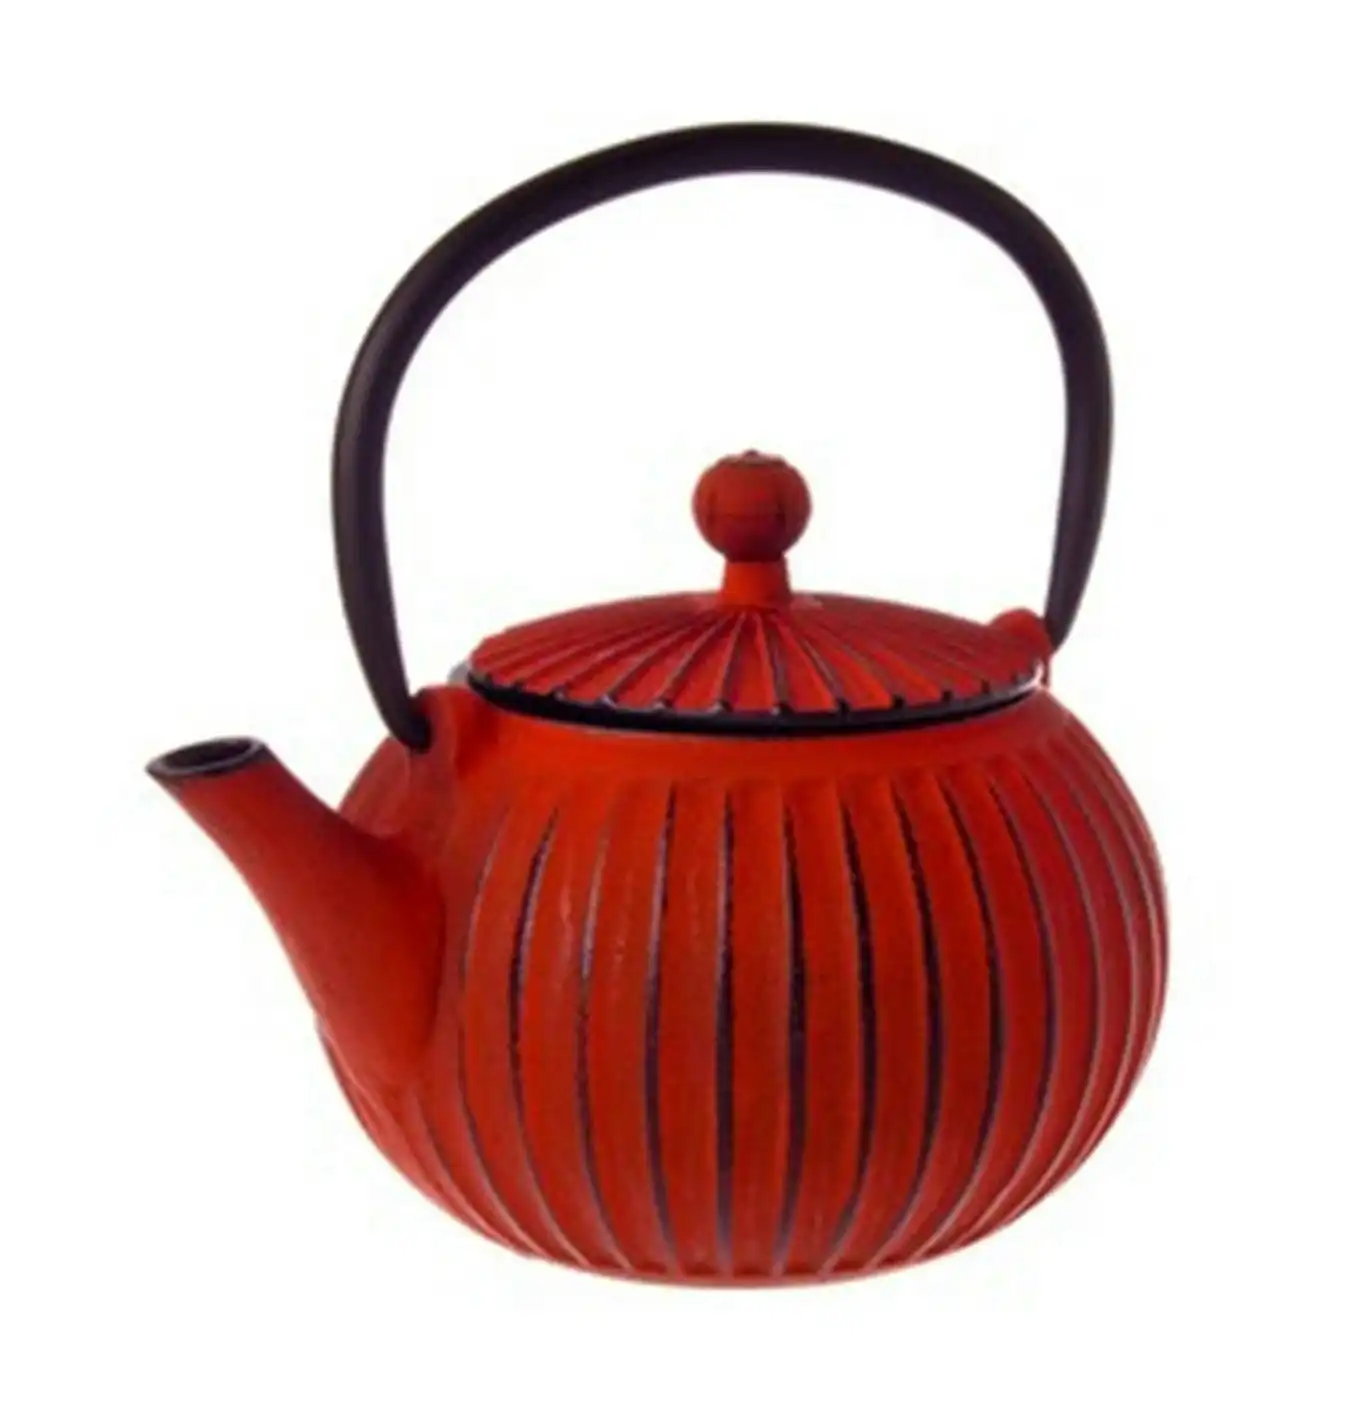 Teaology CAST IRON TEAPOT - RIBBED RED 500ml